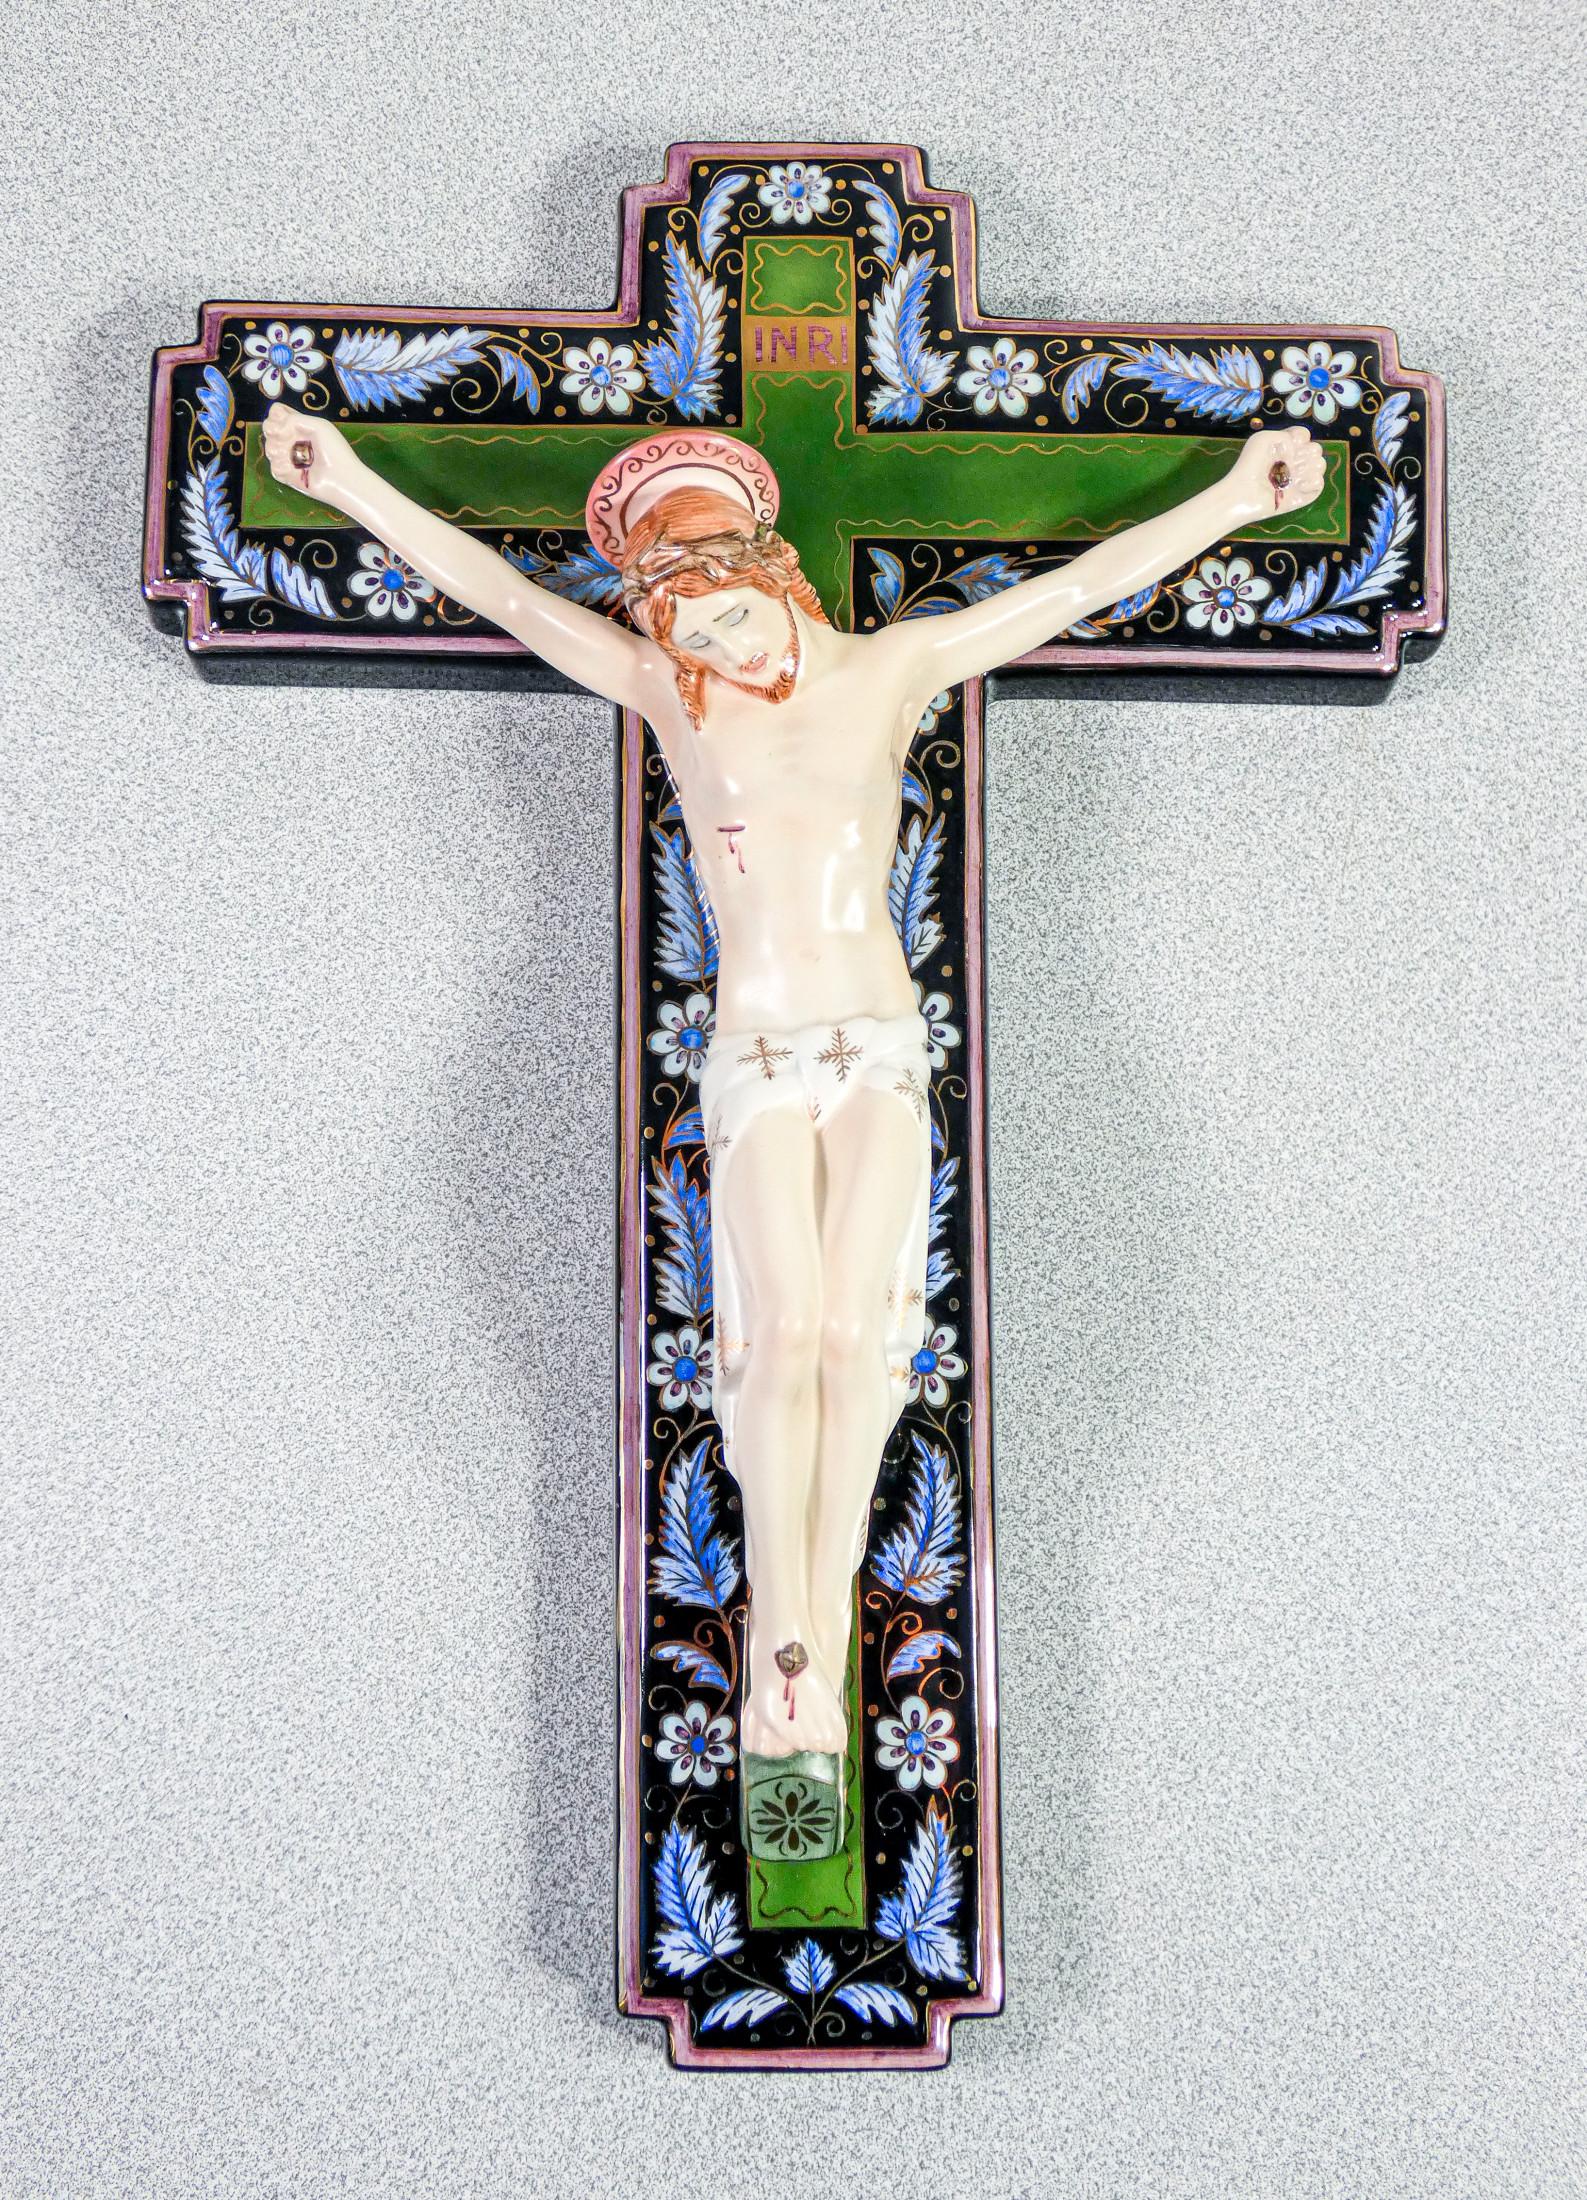 LENCI
hand painted ceramic
crucifix, decorator
Maria BALOSSI

ORIGIN
Turin, Italy

PERIOD
1930s

AUTHOR
Maria BALOSSI
Decorator at the Turin ceramic factory 'Lenci' from the end of the 1920s and certainly until the end of the 1950s,